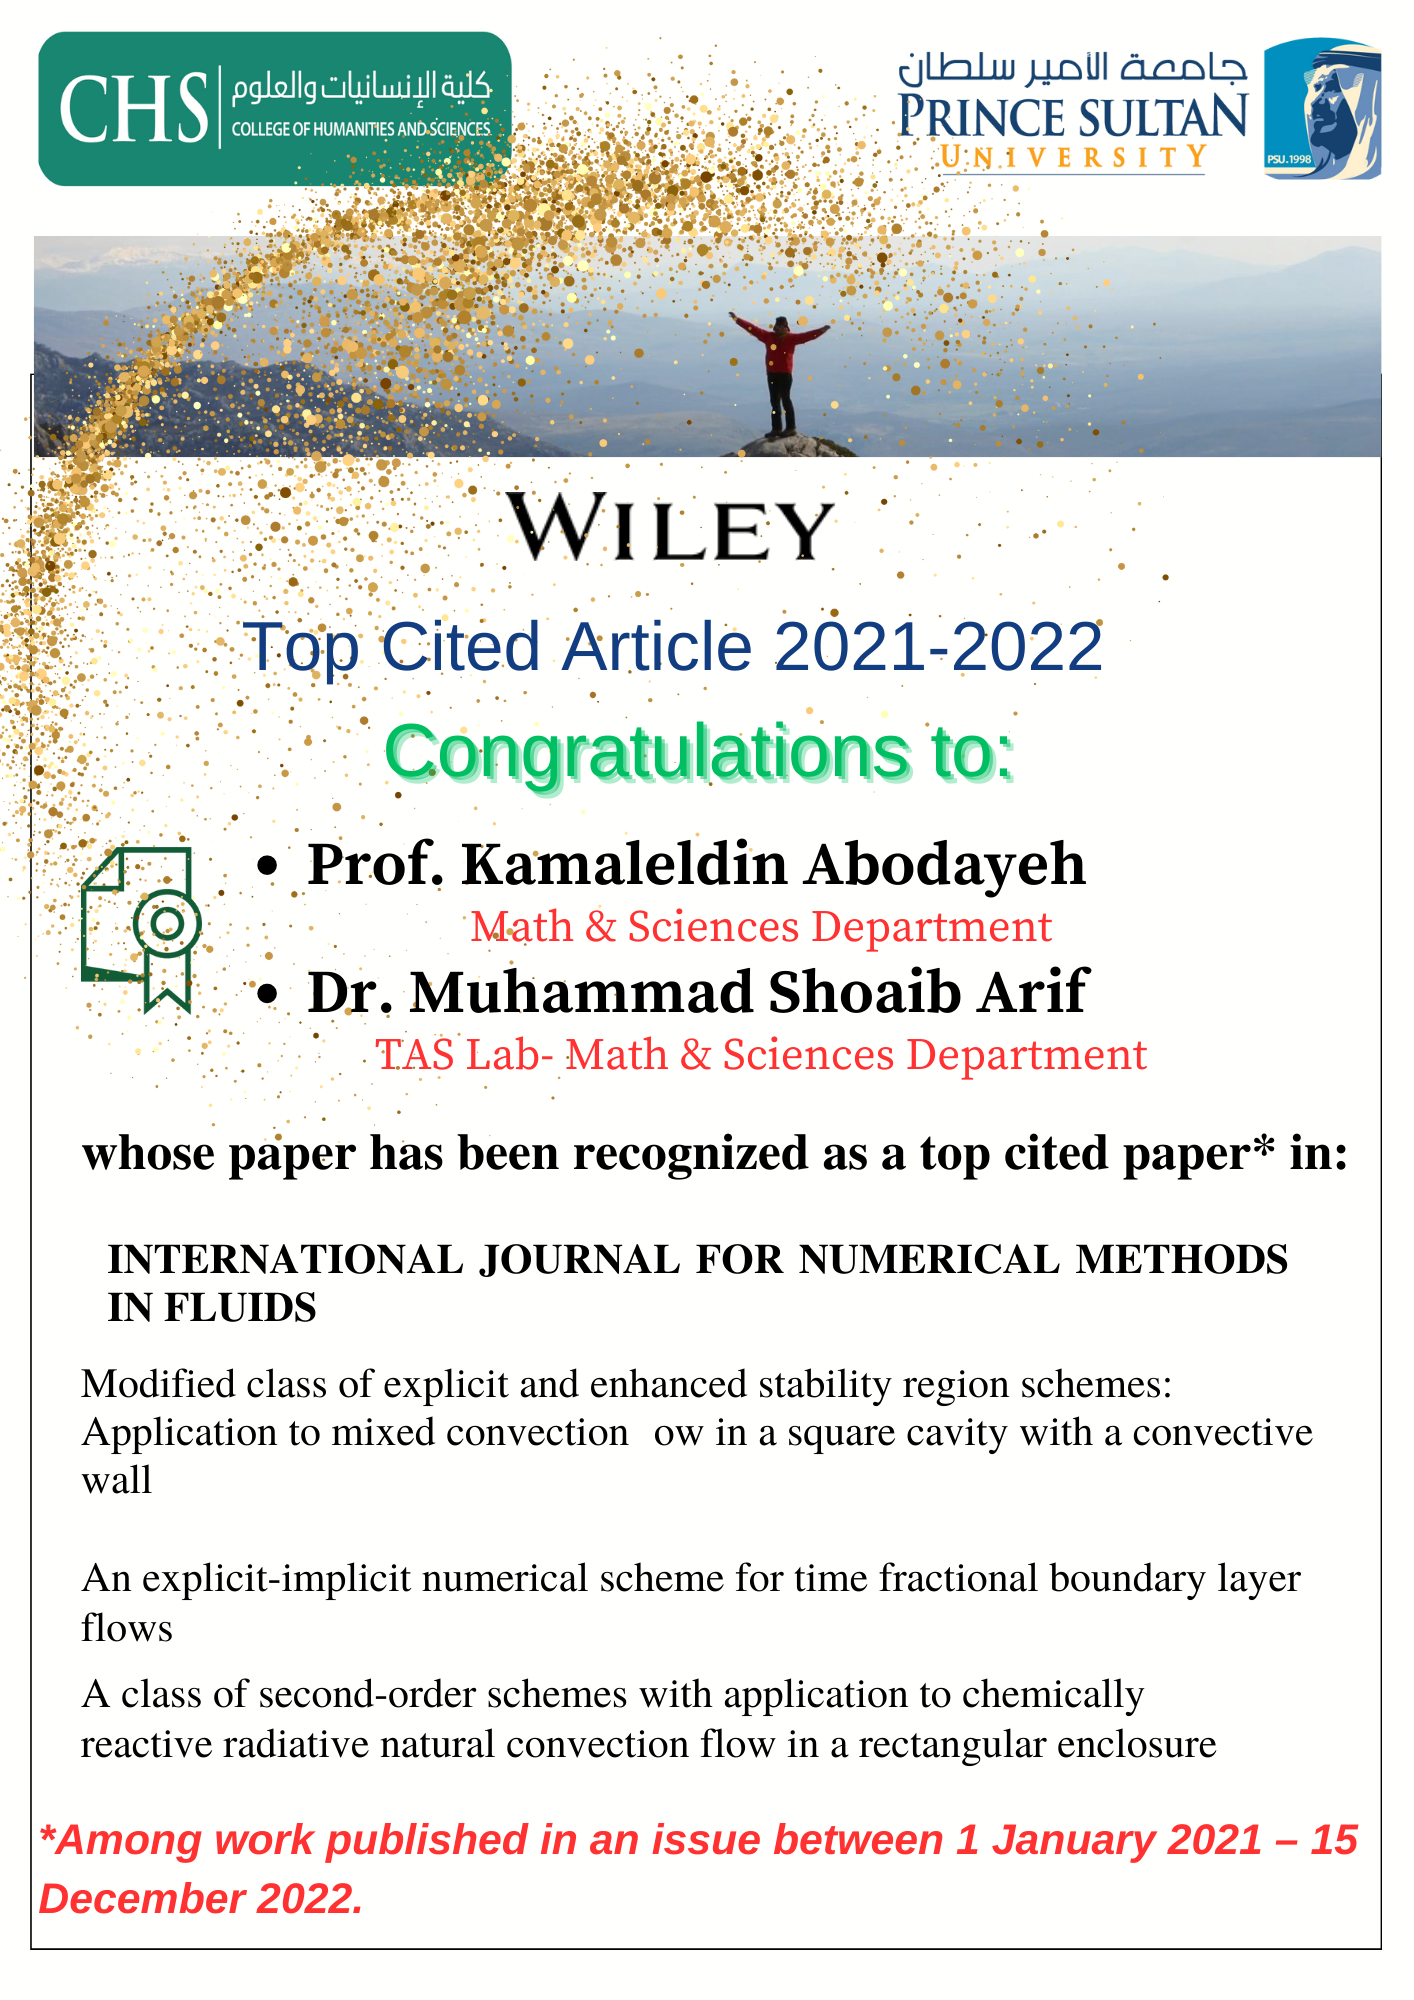 WILEY Top Cited Article 2021-2022/ Congratulatory Note